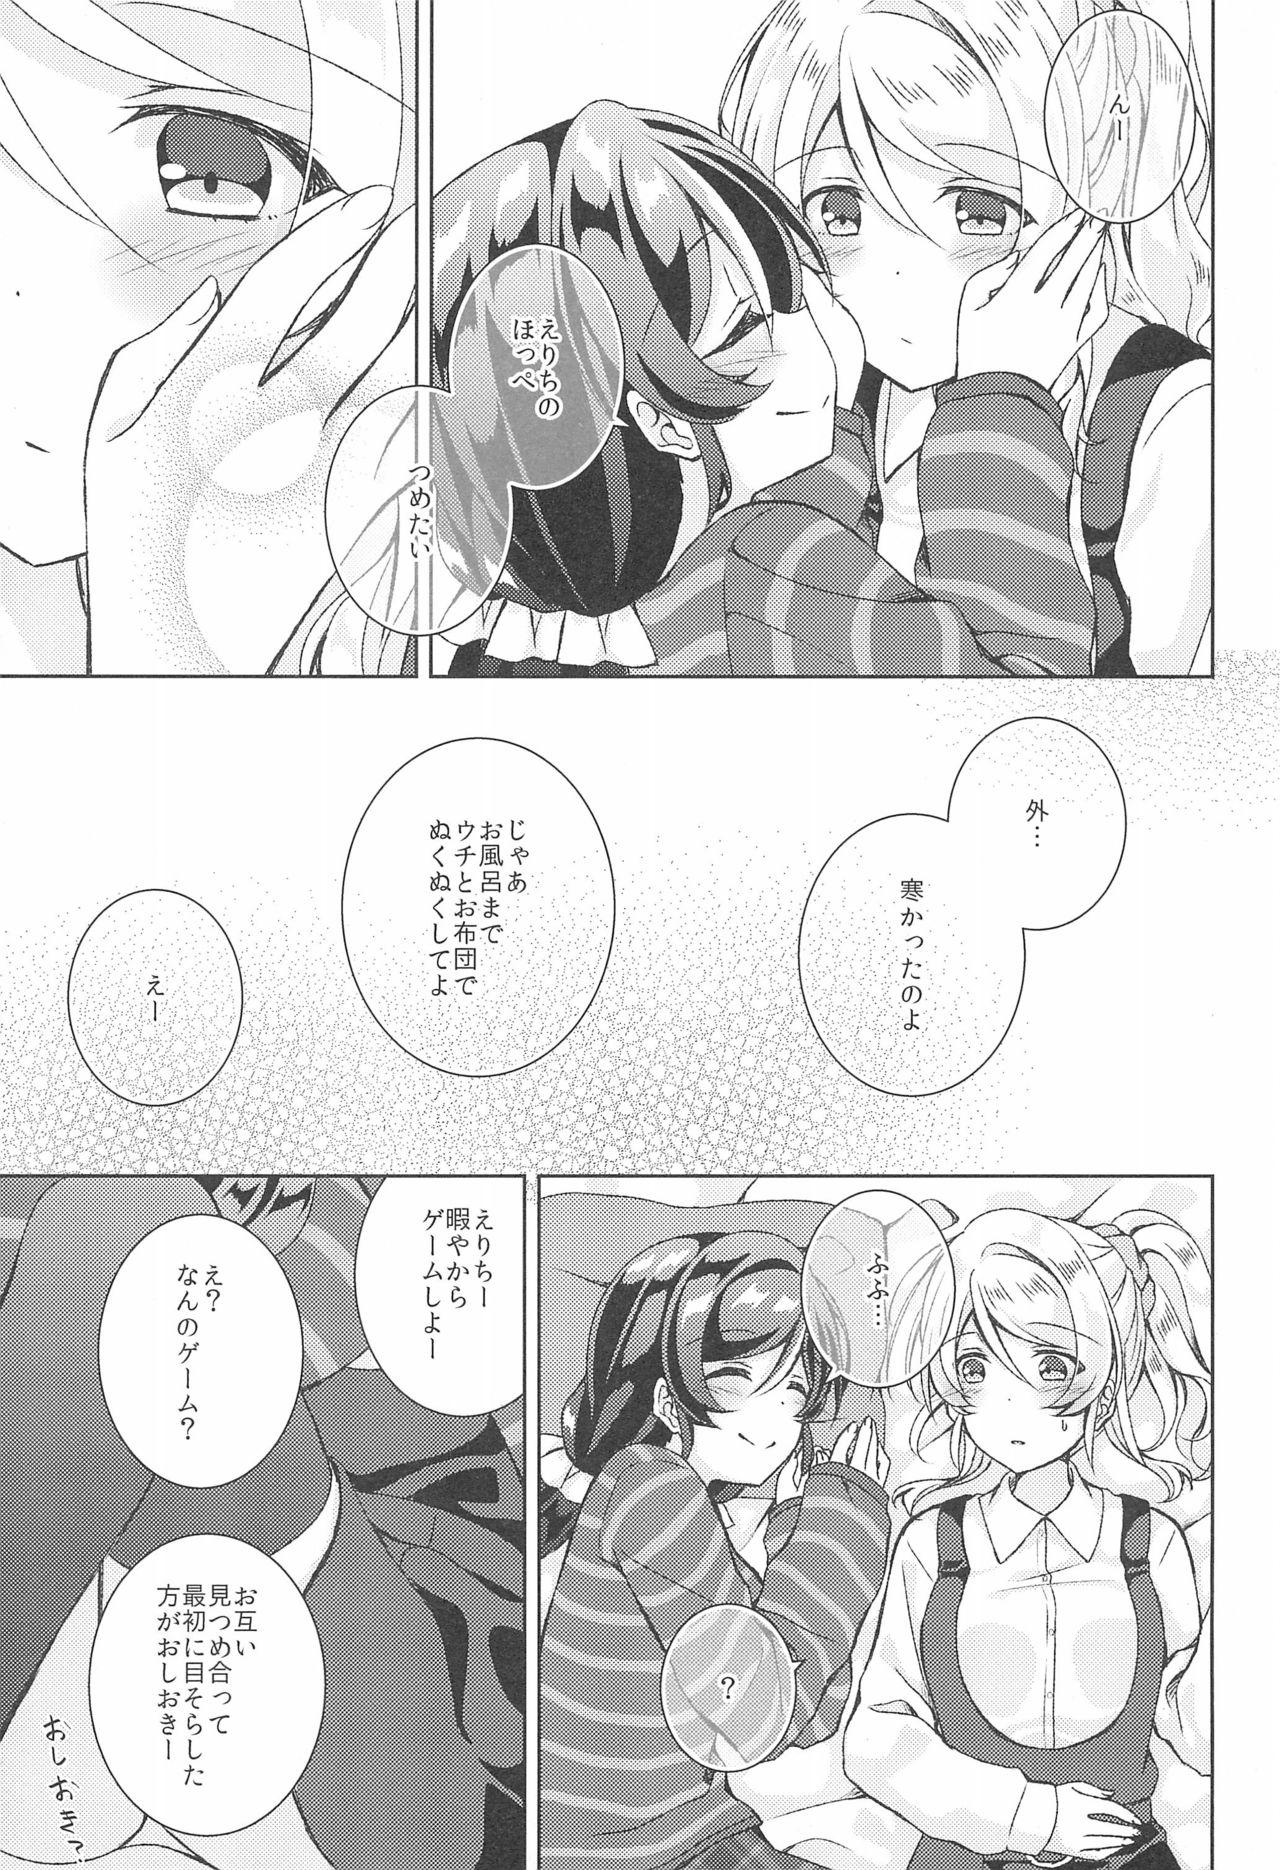 Special Locations Sweet Winter Holiday - Love live Ejaculation - Page 7